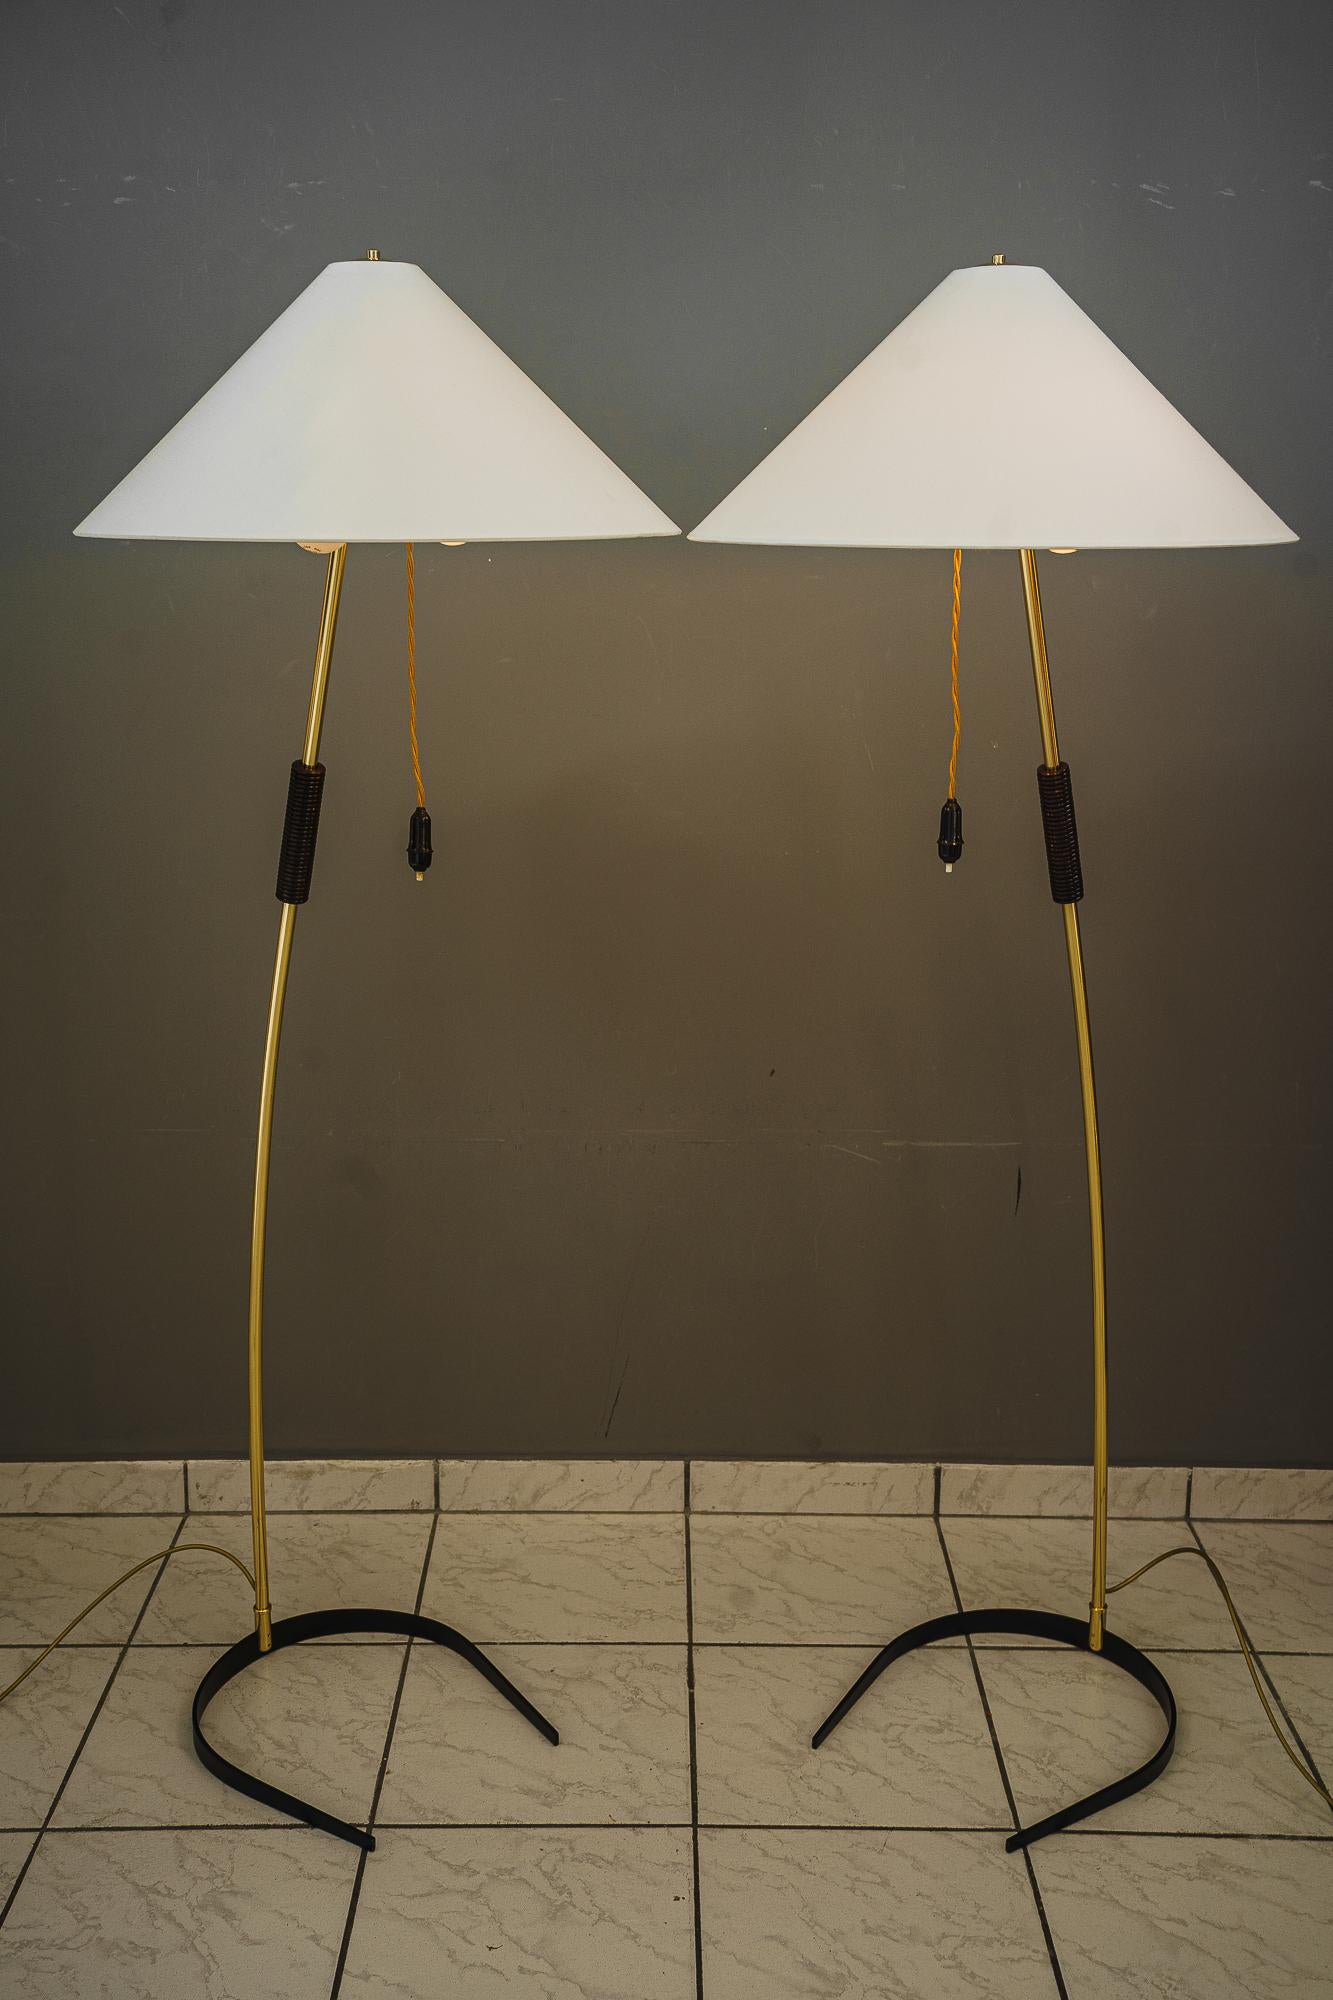 2x Rupert Nikoll Floor Lamps with Wood Handle, circa 1950s For Sale 3